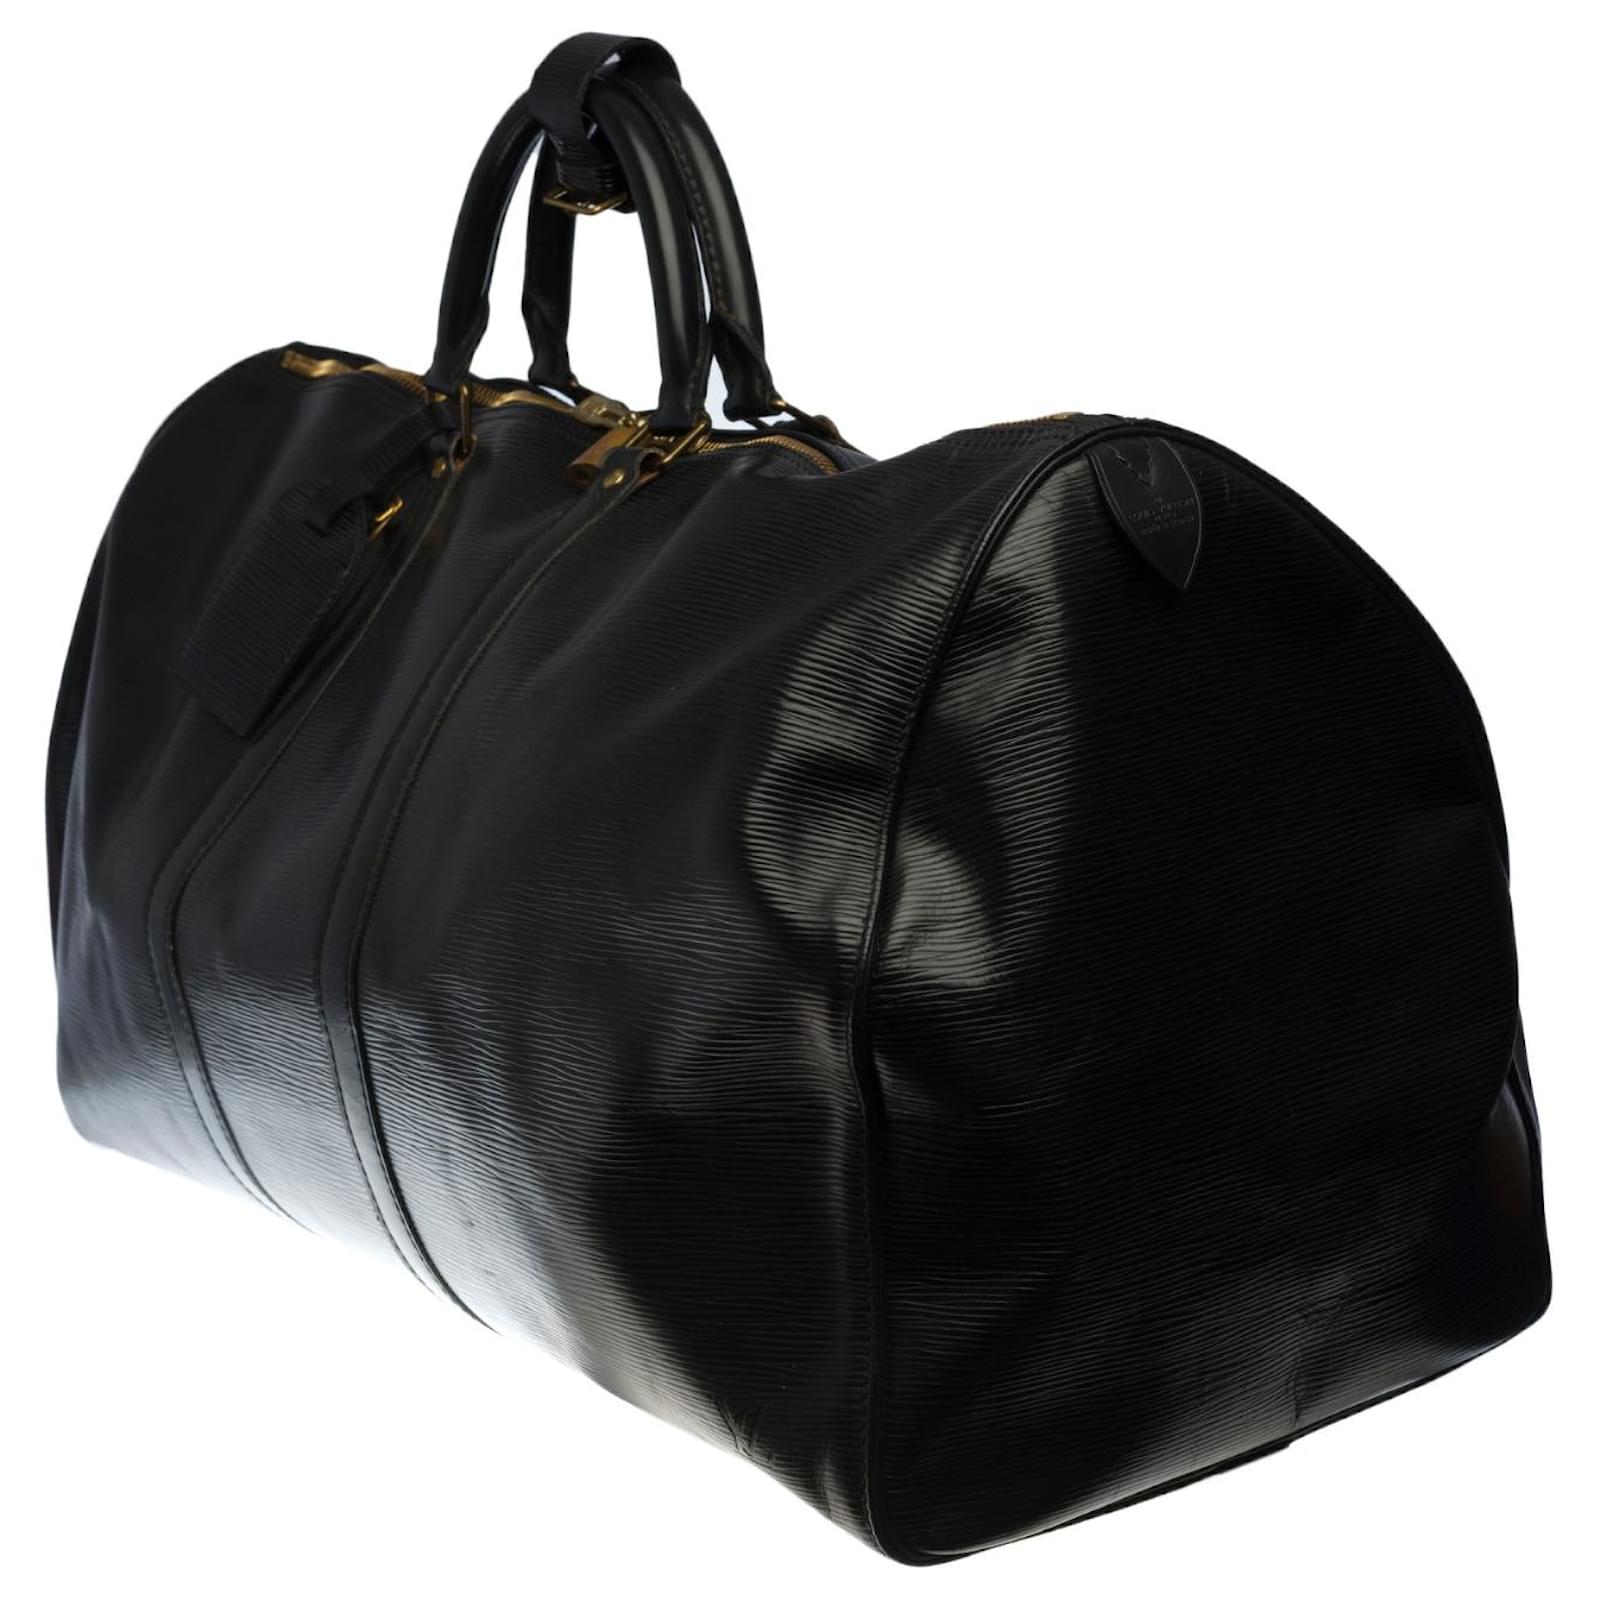 Shop for Louis Vuitton Black Epi Leather Keepall 55 cm Duffle Bag Luggage -  Shipped from USA